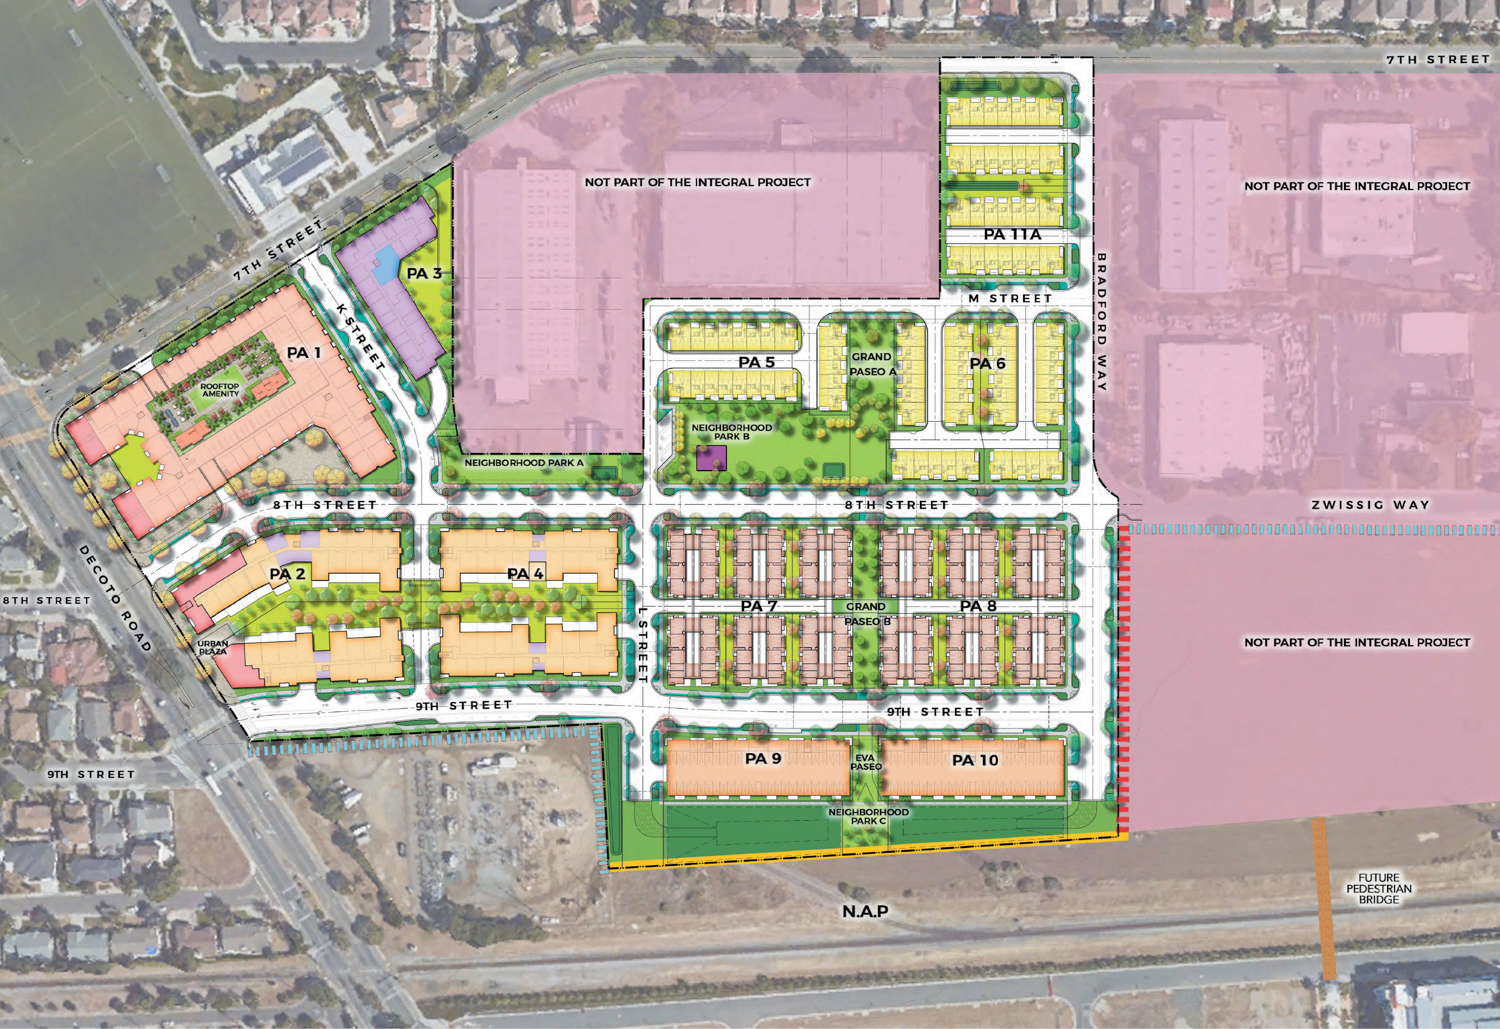 Union City Station East neighborhood plan with landscaping concept illustrated, rendering from Urban Communities